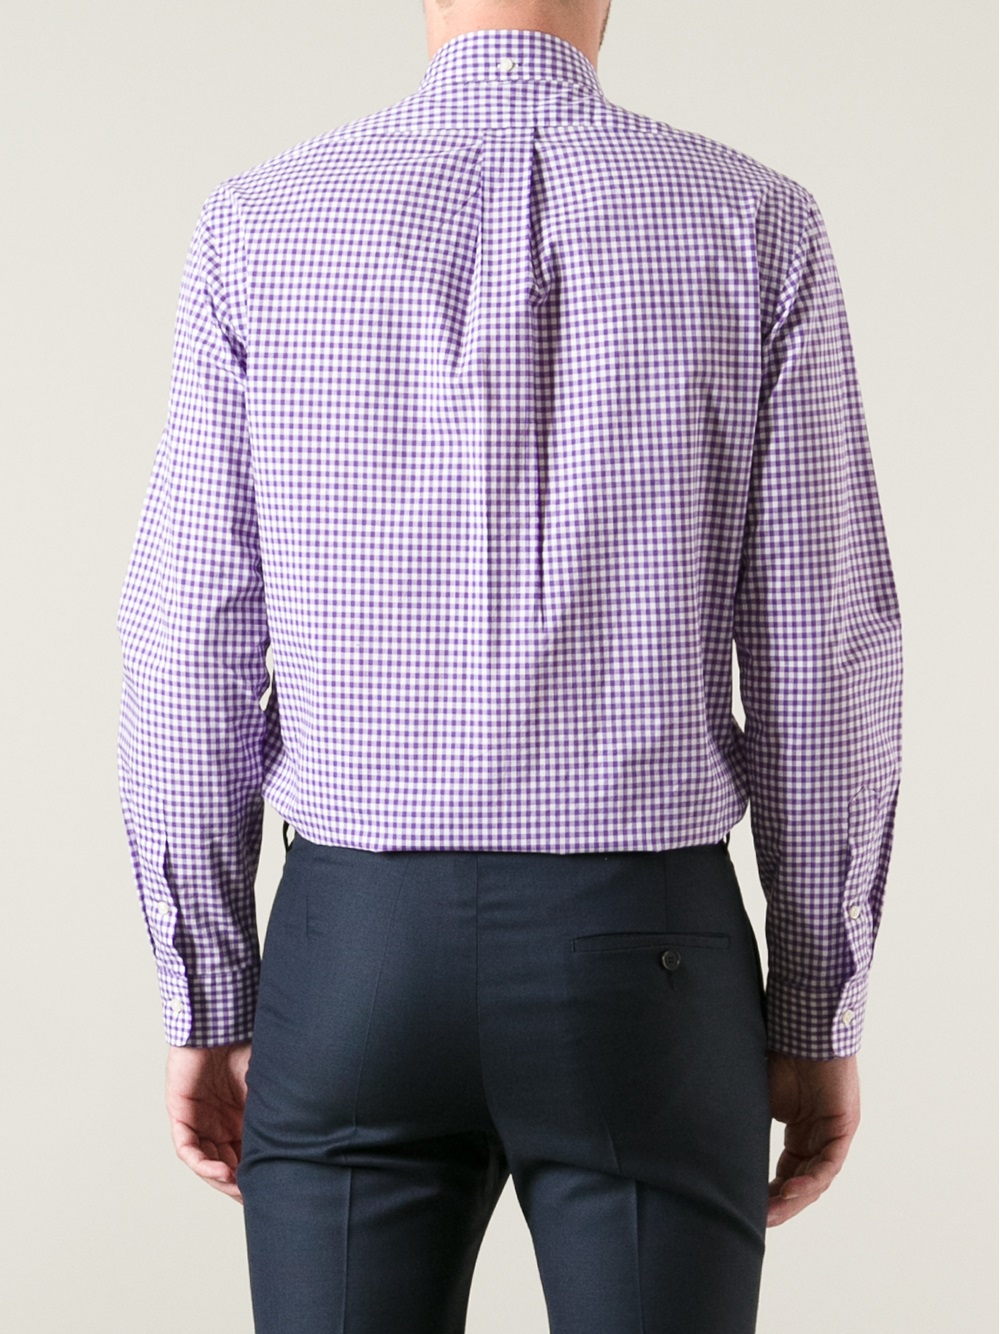 Lyst - Polo Ralph Lauren Checked Shirt in Purple for Men